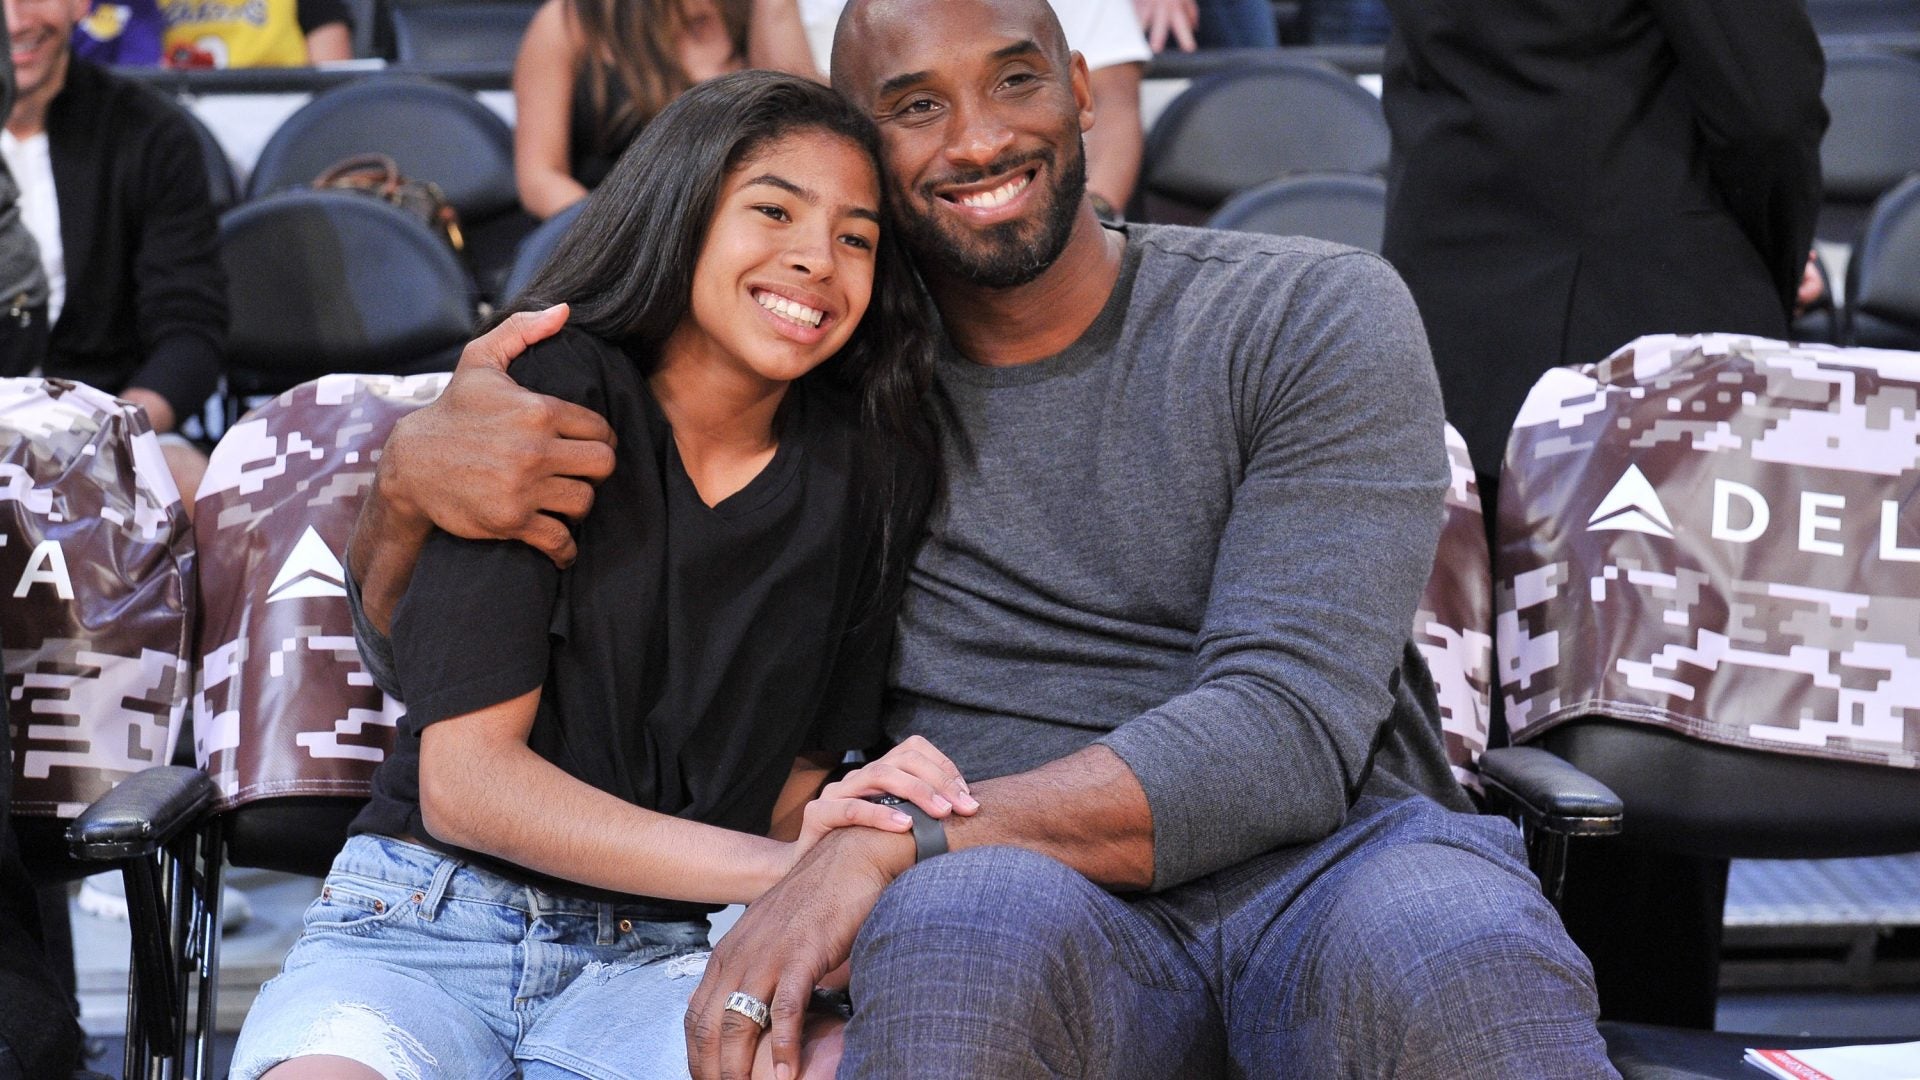 Kobe Bryant And 13-Year Daughter Gianna Memorialized In Private Funeral Ahead of Public Celebration